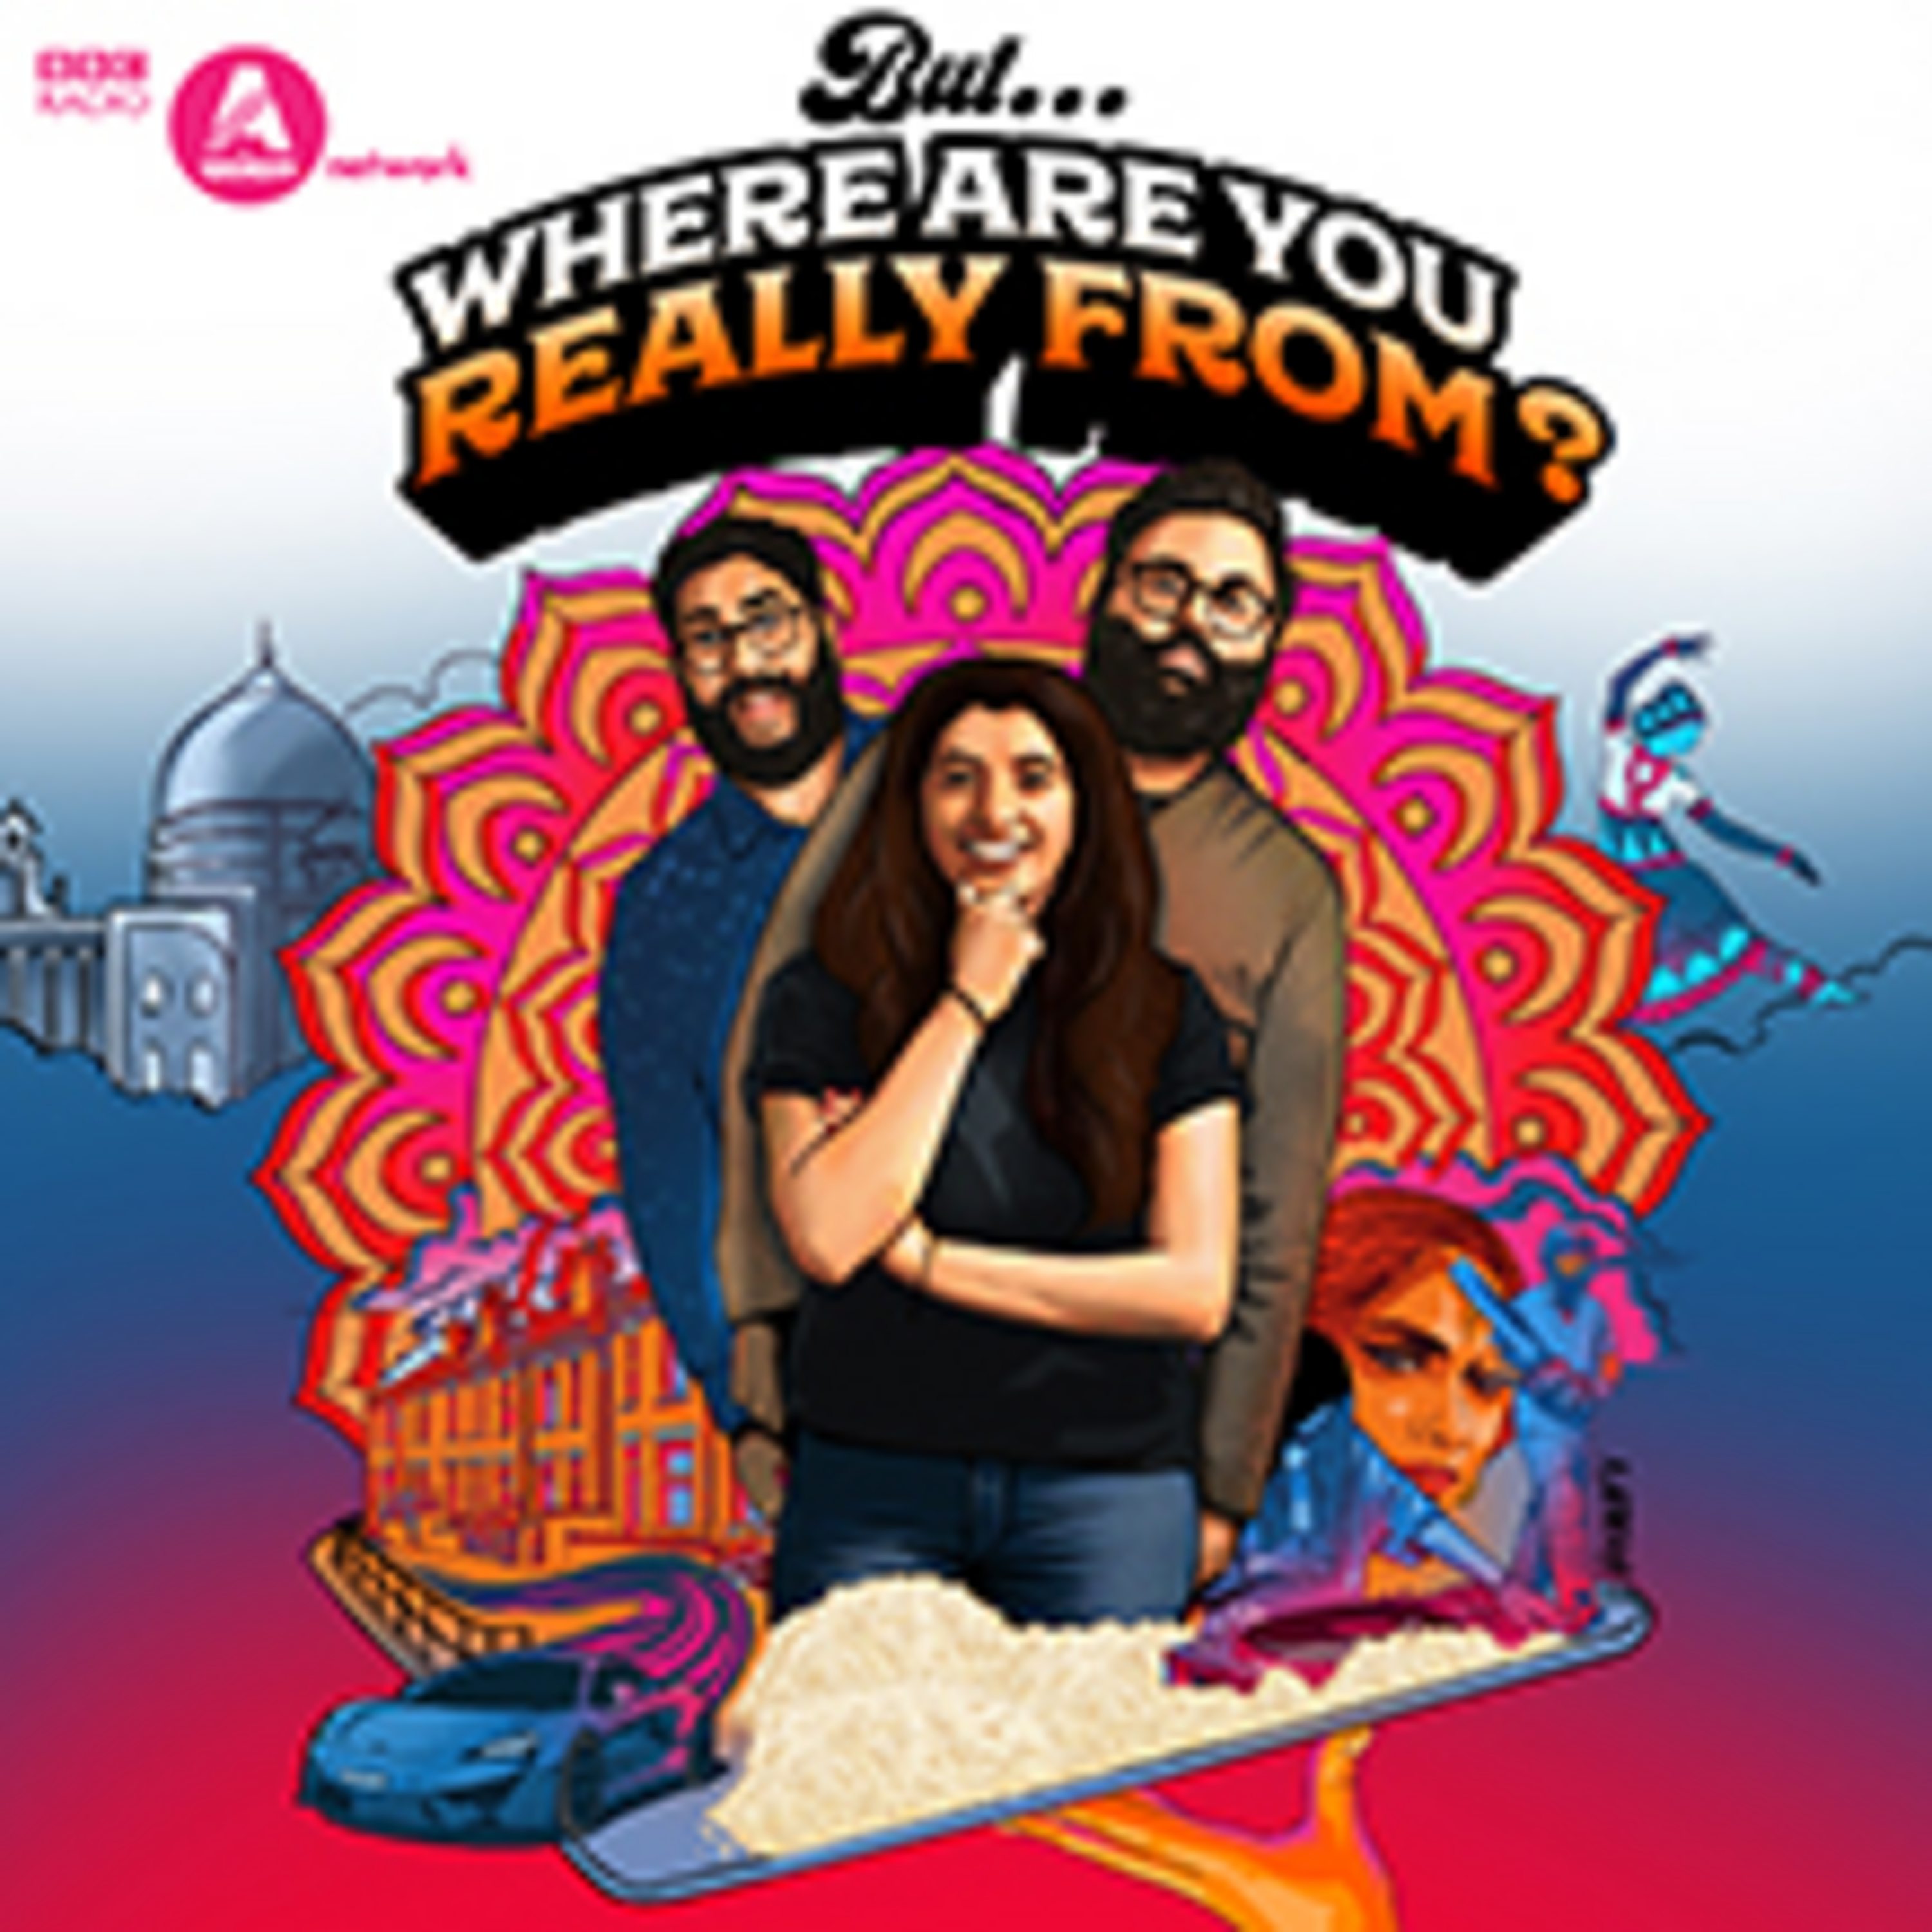 Listen to Series 2 of  But...Where Are You Really From?